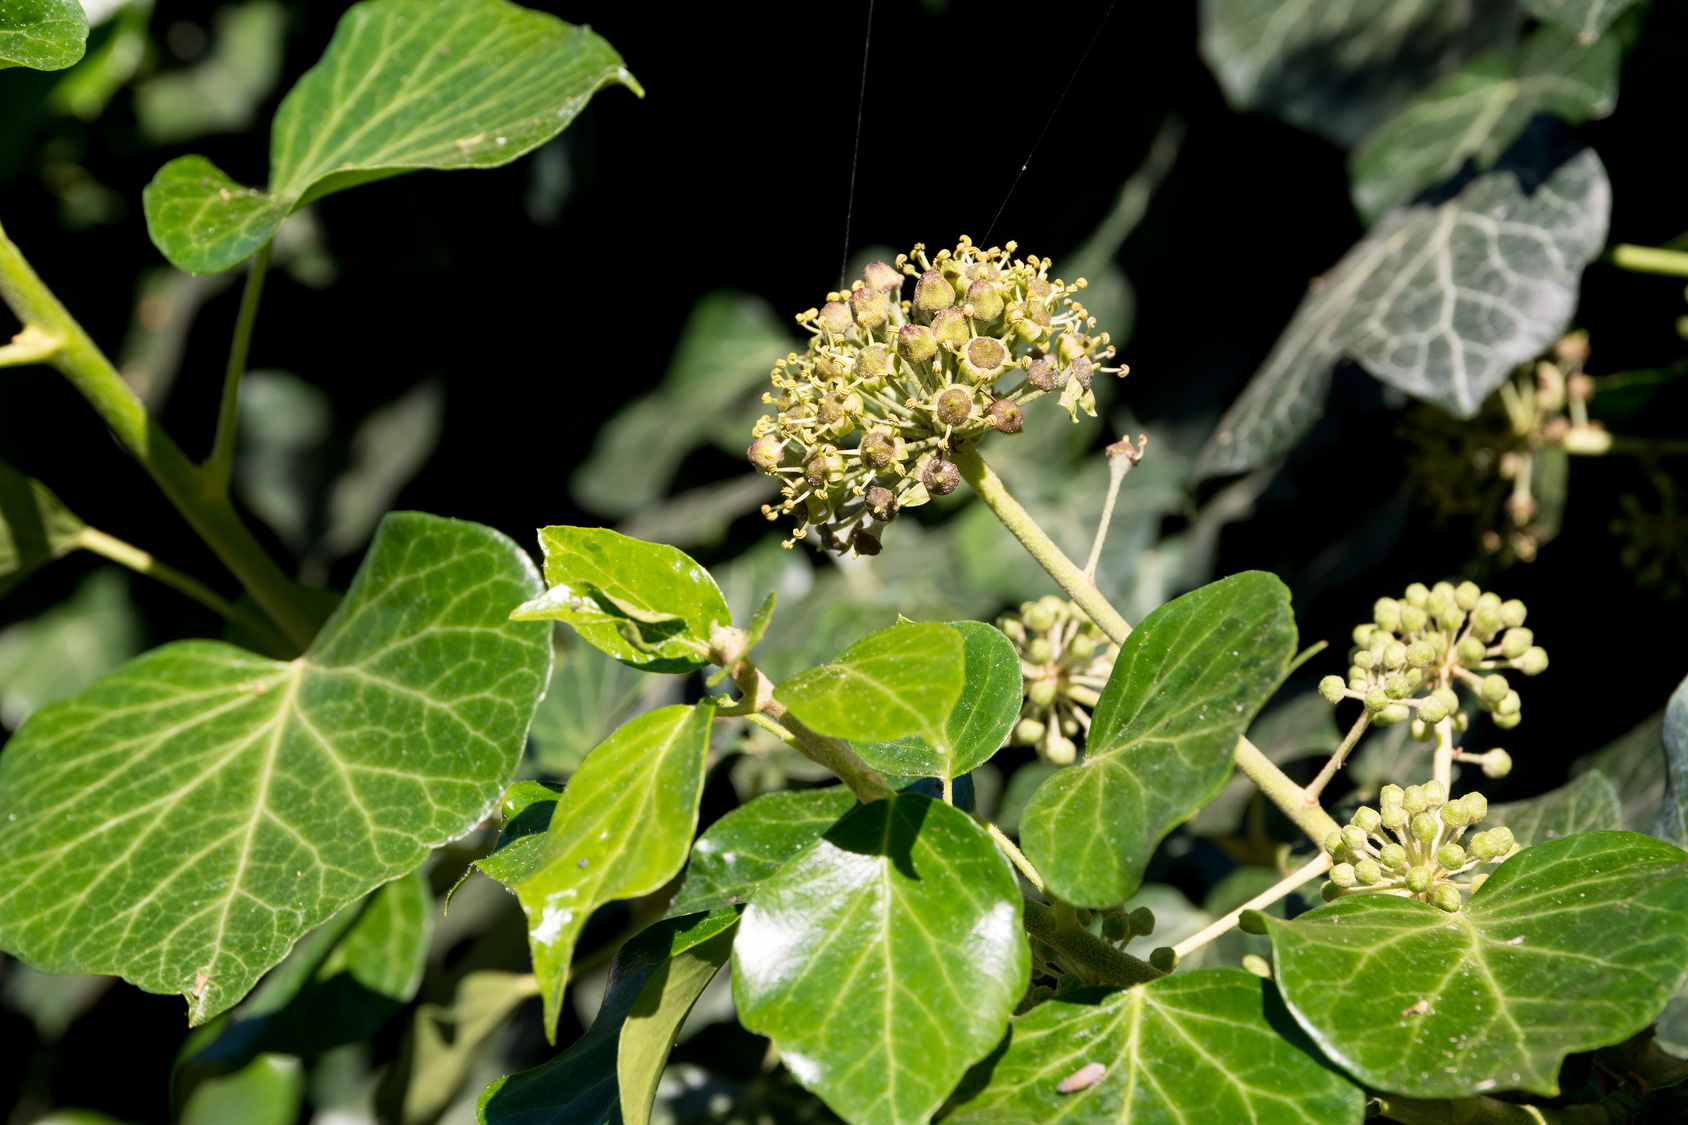 Common ivy (Hedera helix) in blossom, self climber with evergreen foliage and blooms